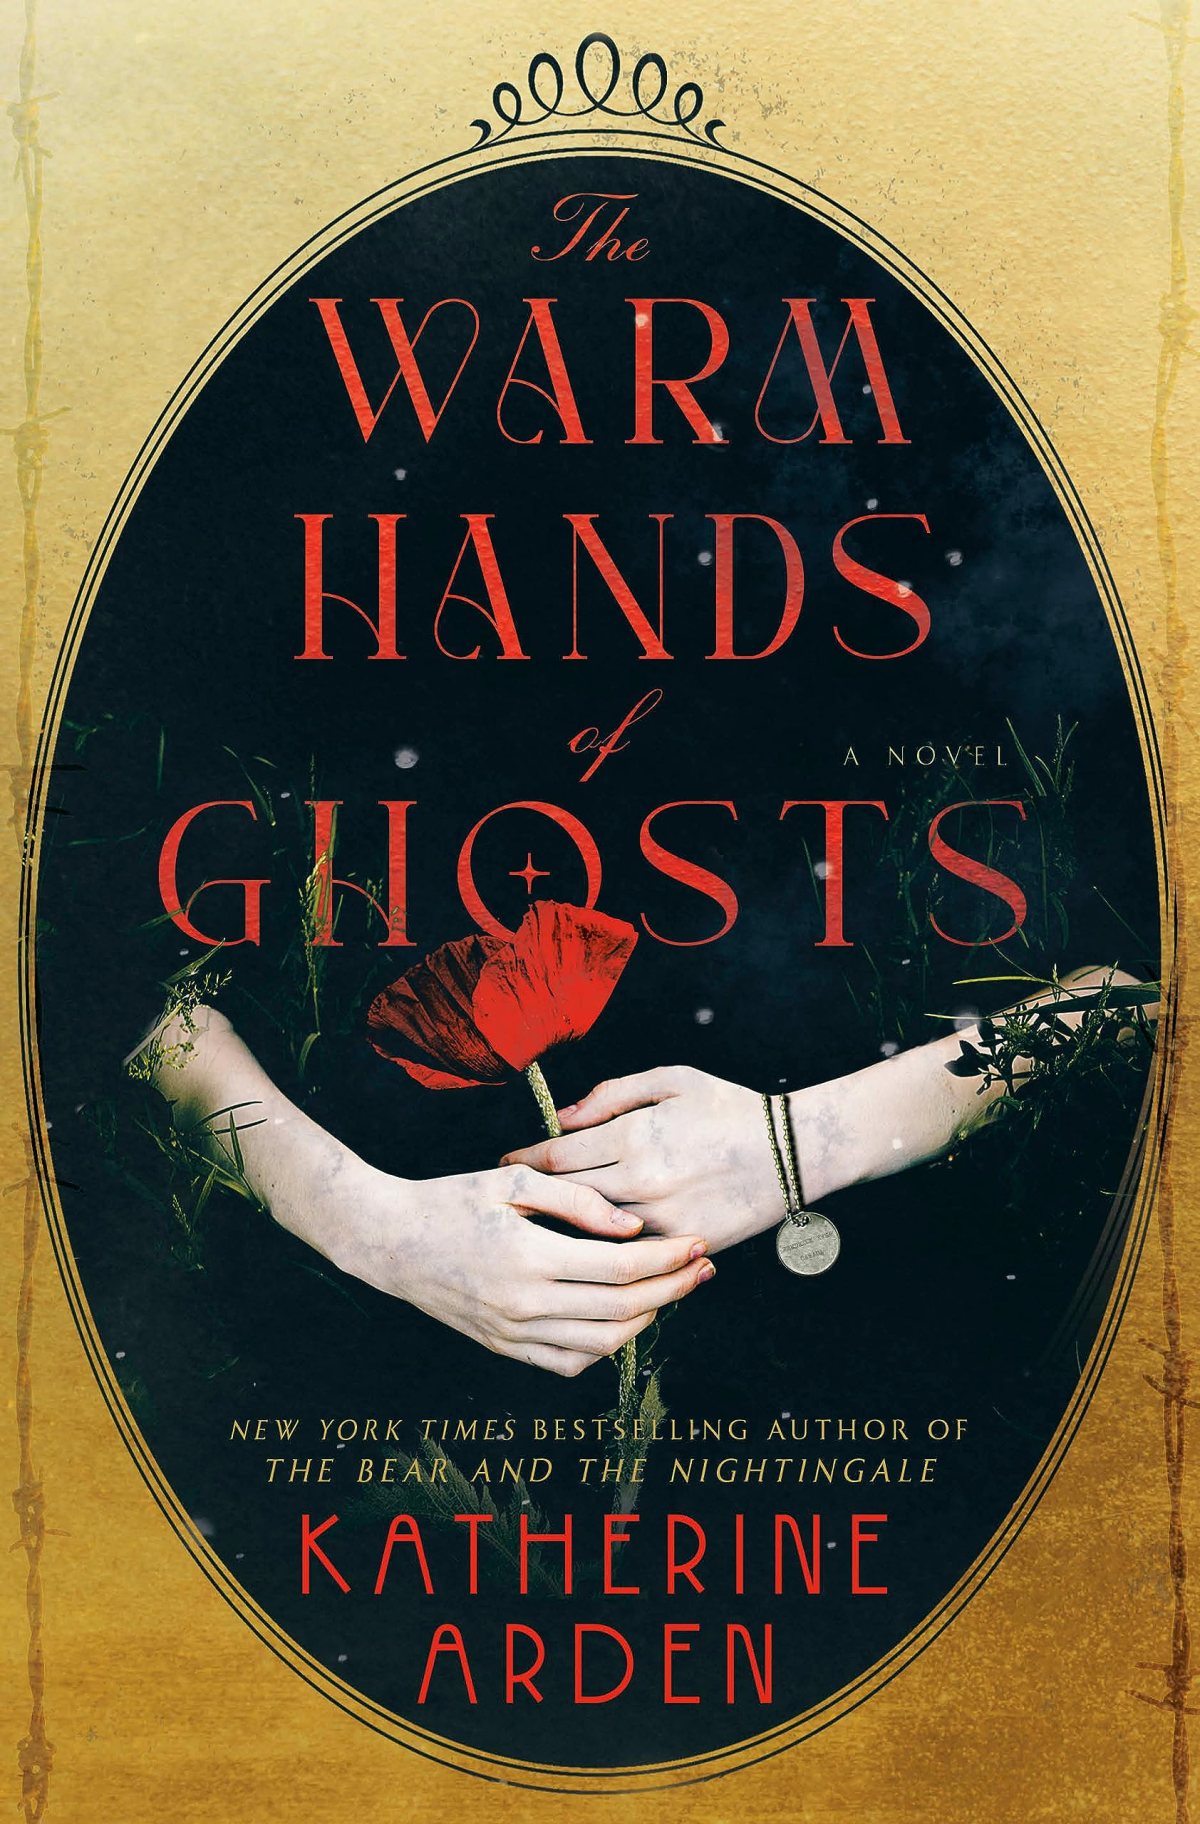 BOOK REVIEW: “The Warm Hands of Ghosts” by Katherine Arden